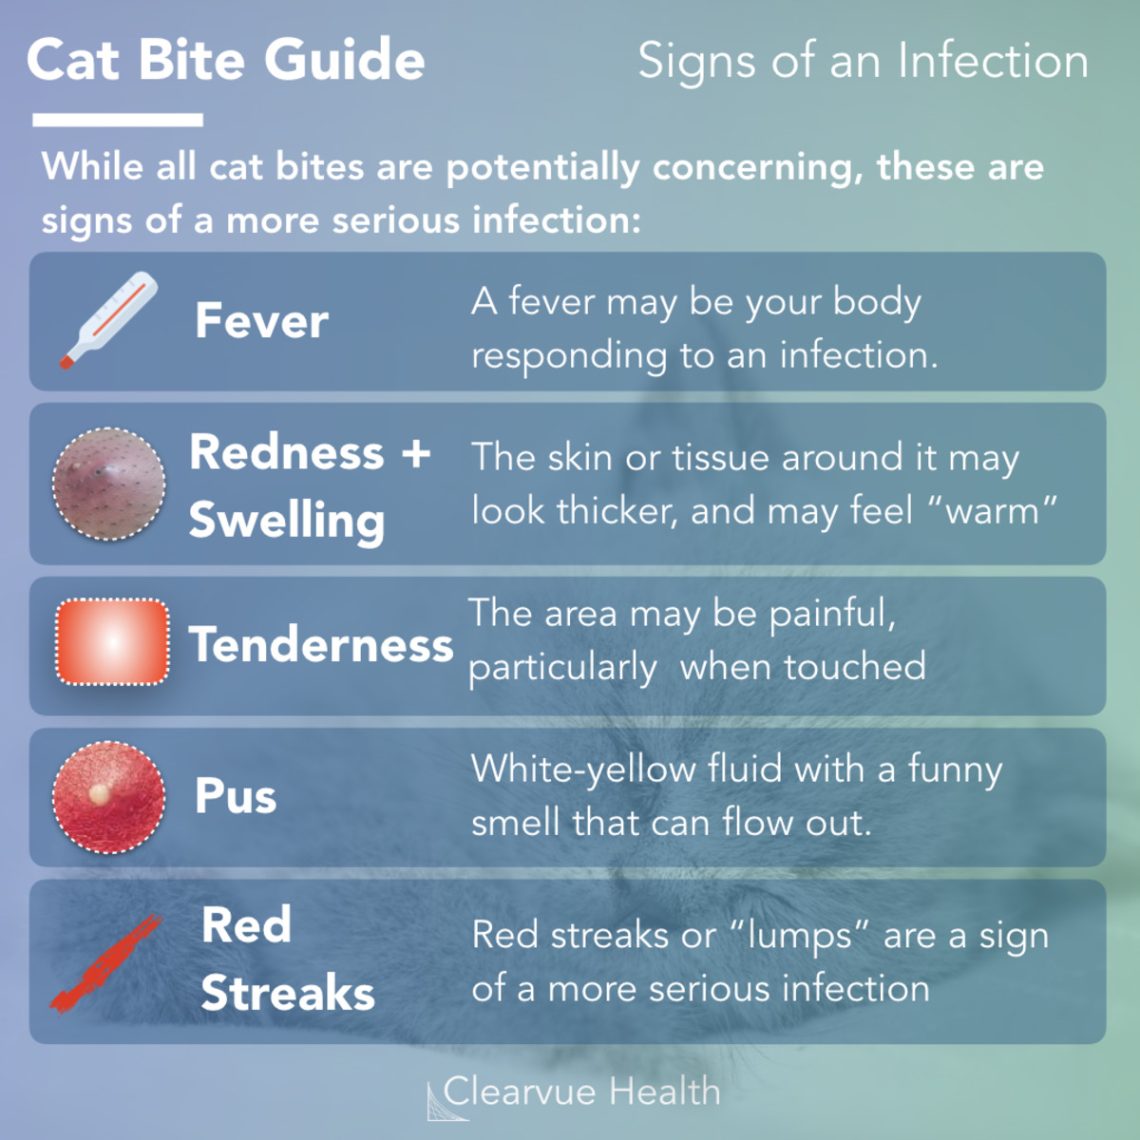 What to do if bitten by a cat